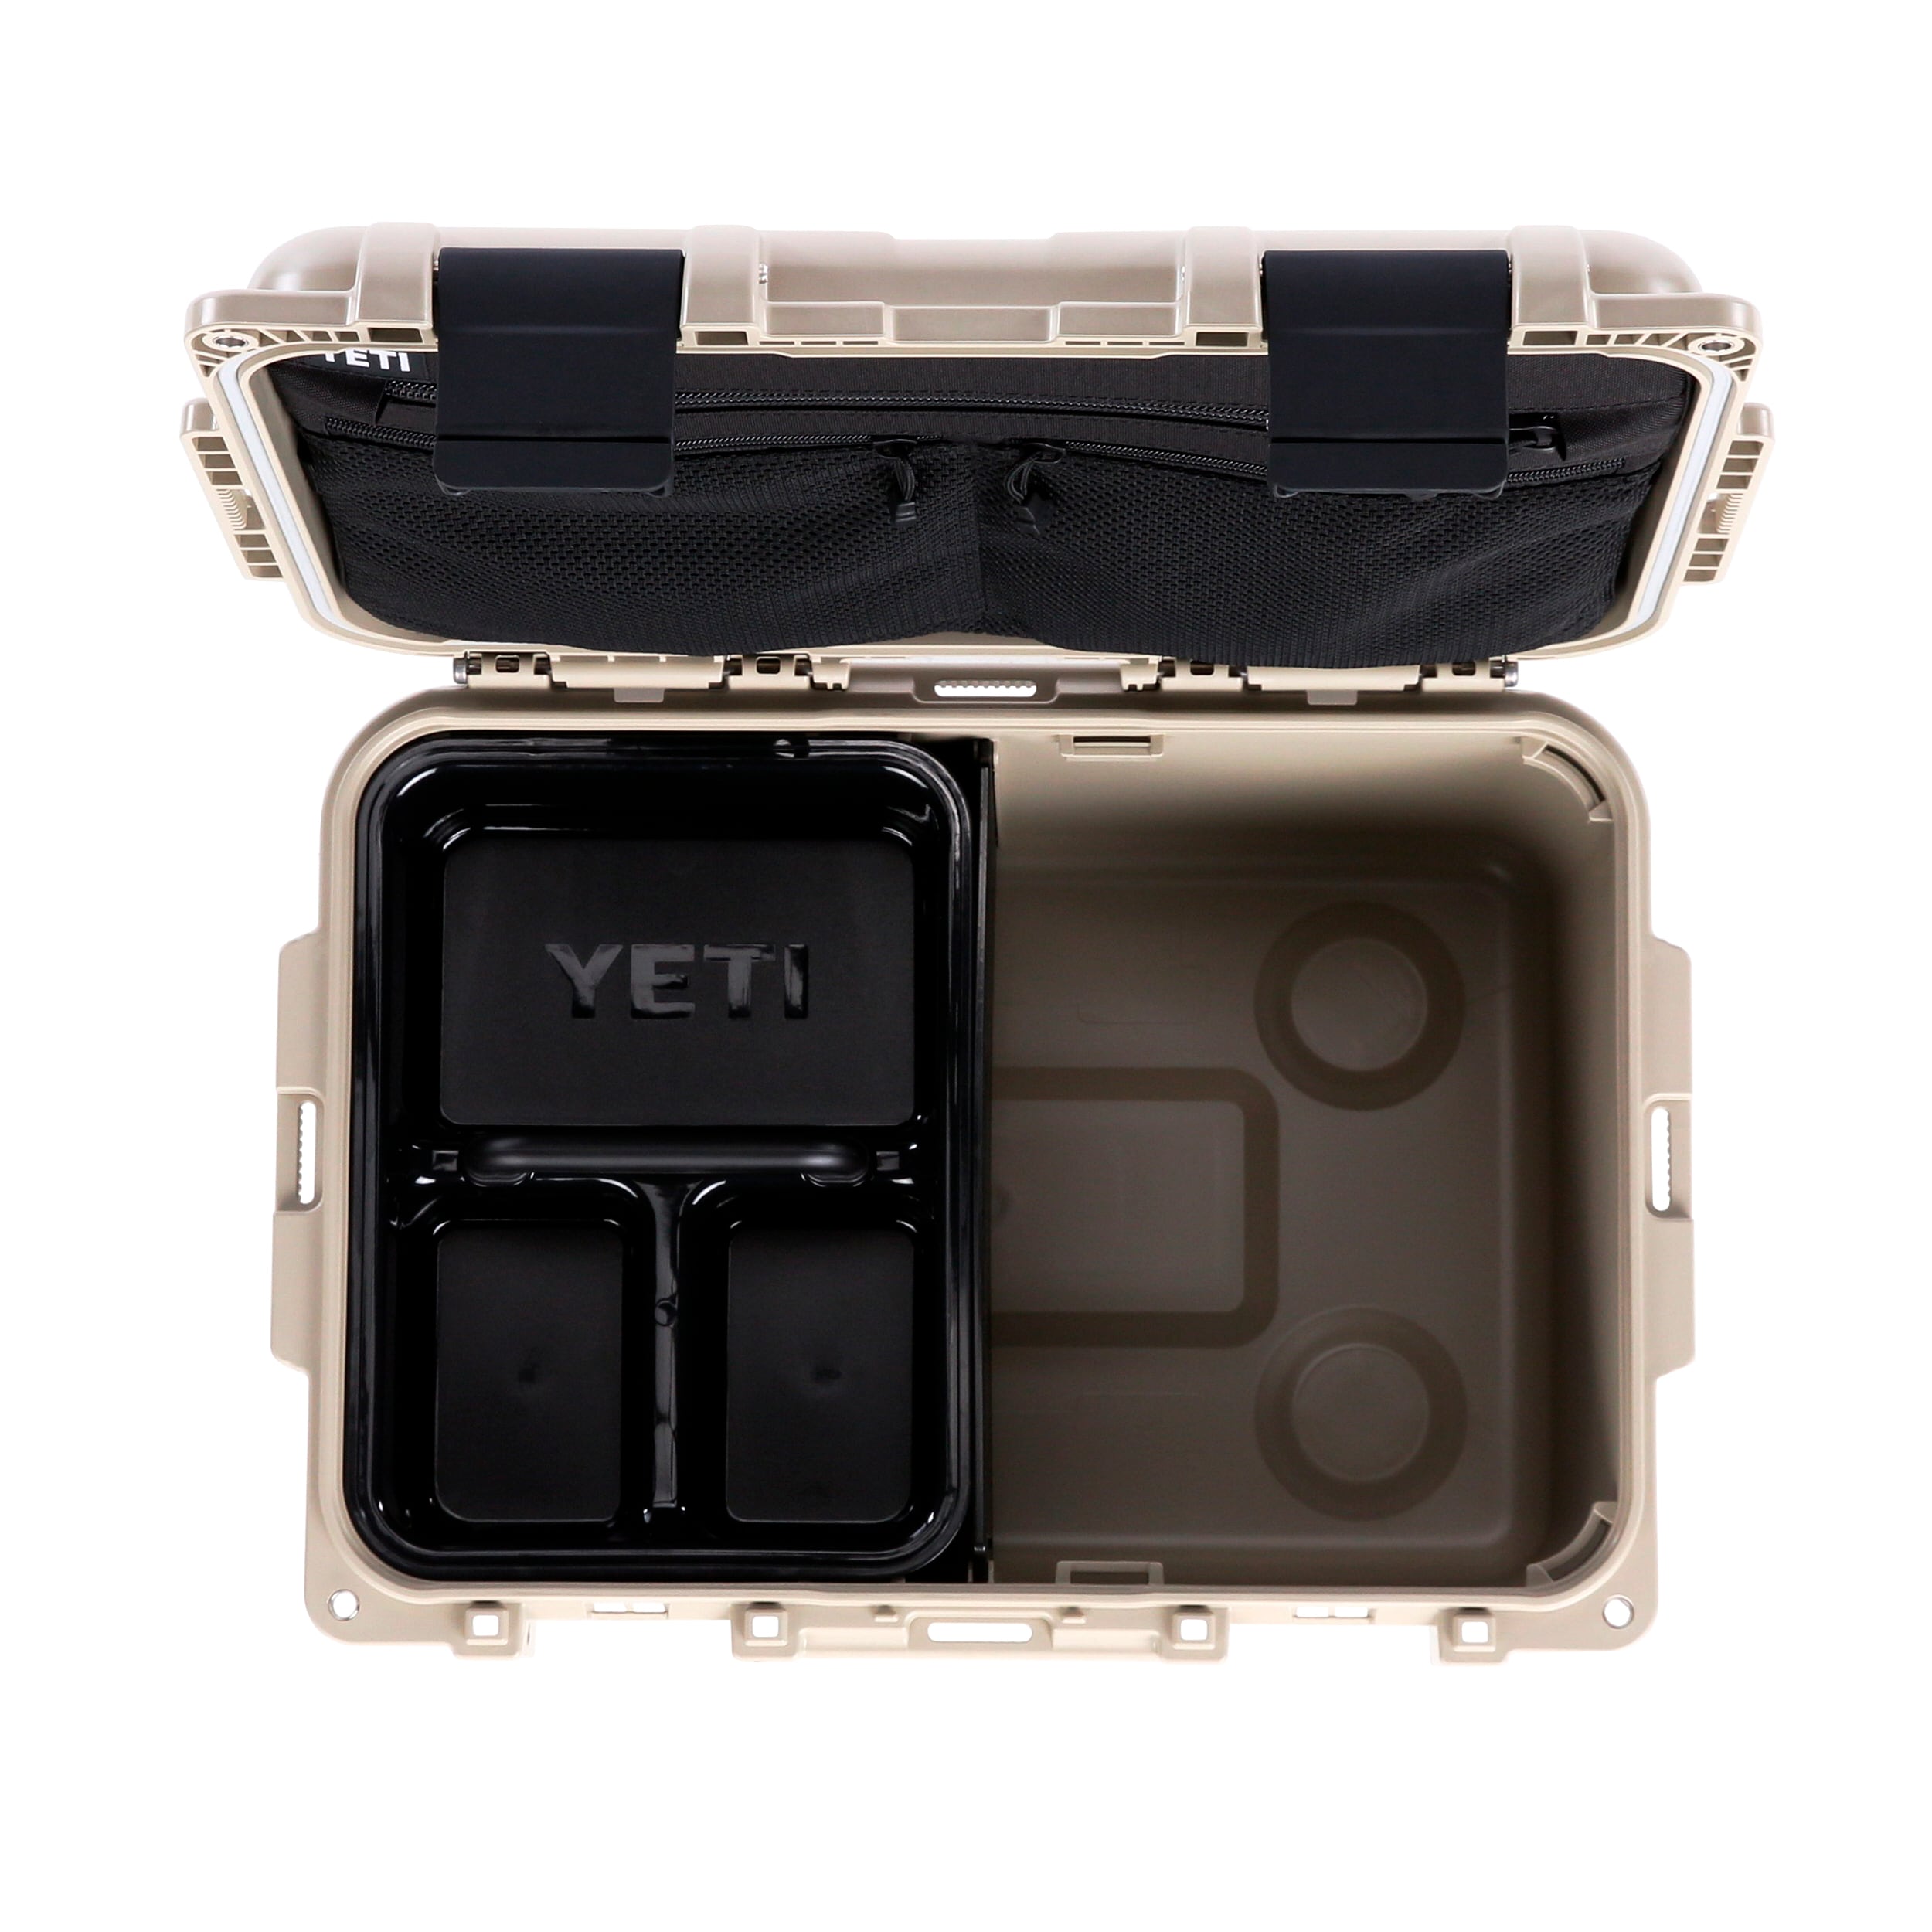 YETI Launches a Burly Cargo Crate, the LoadOut GoBox